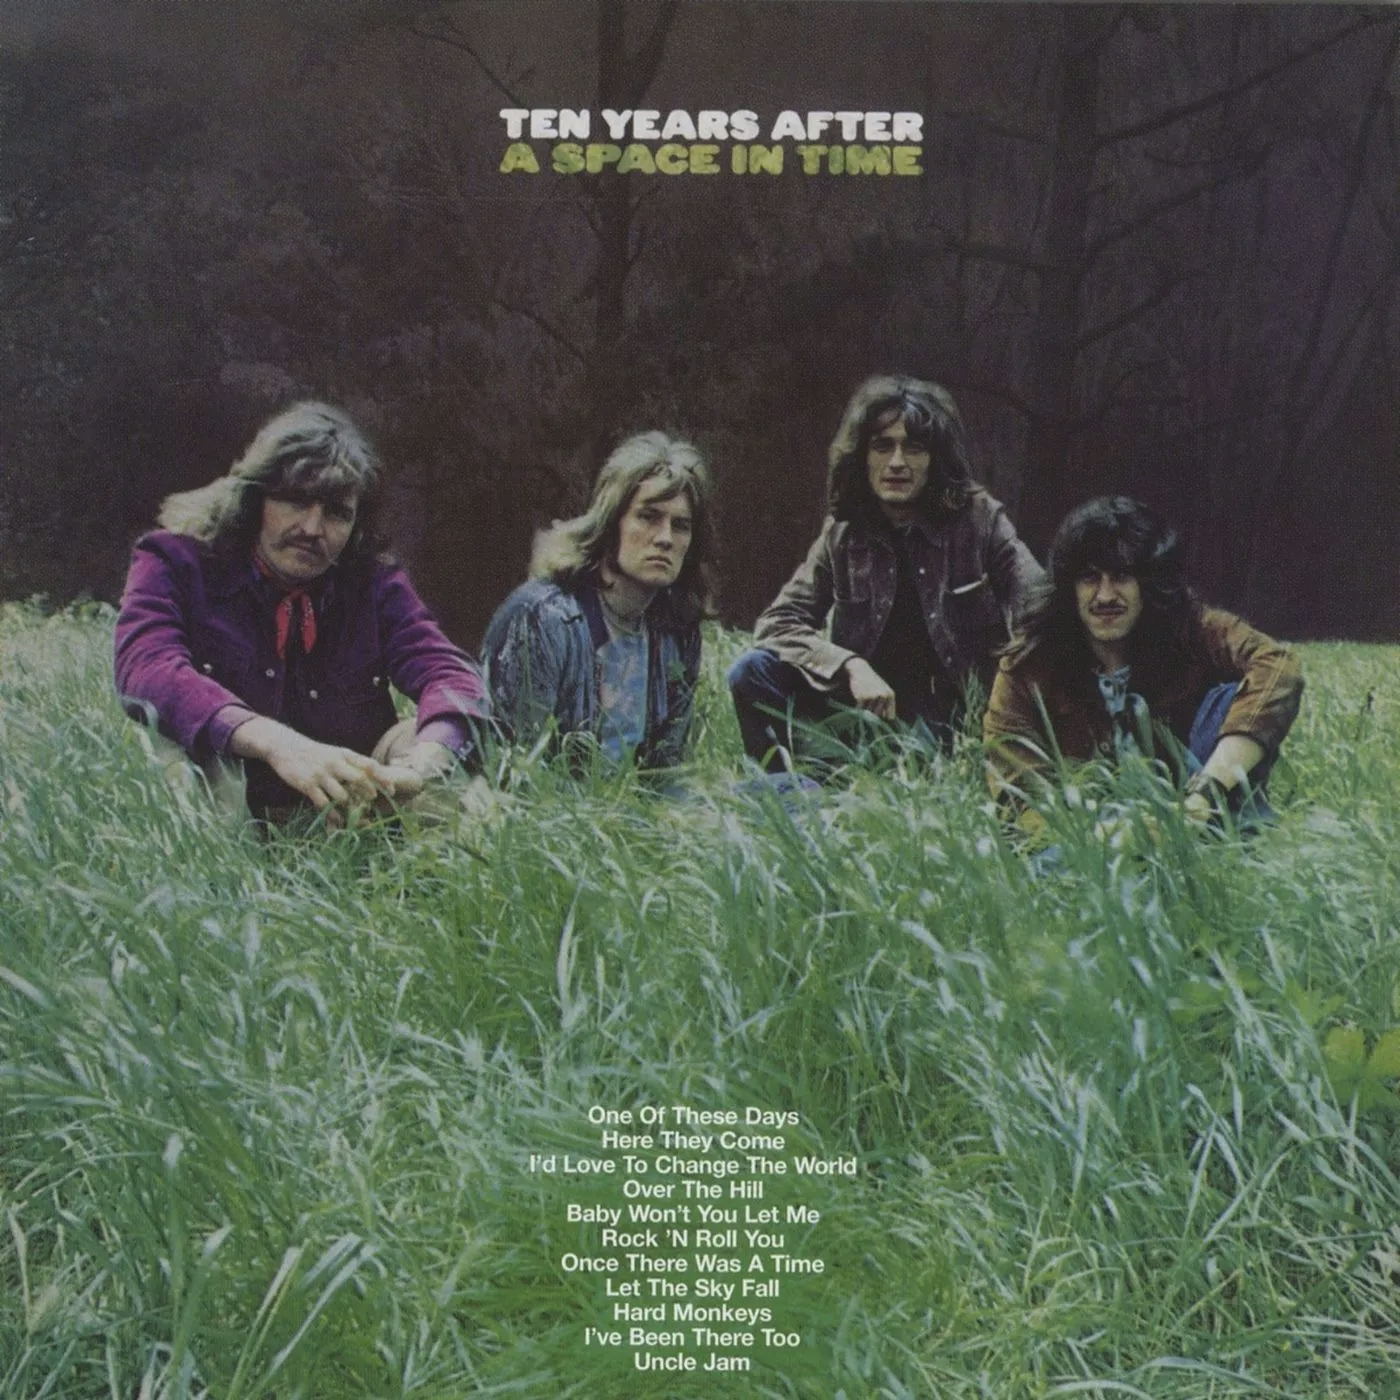 Album artwork for Album artwork for A Space In Time by Ten Years After by A Space In Time - Ten Years After